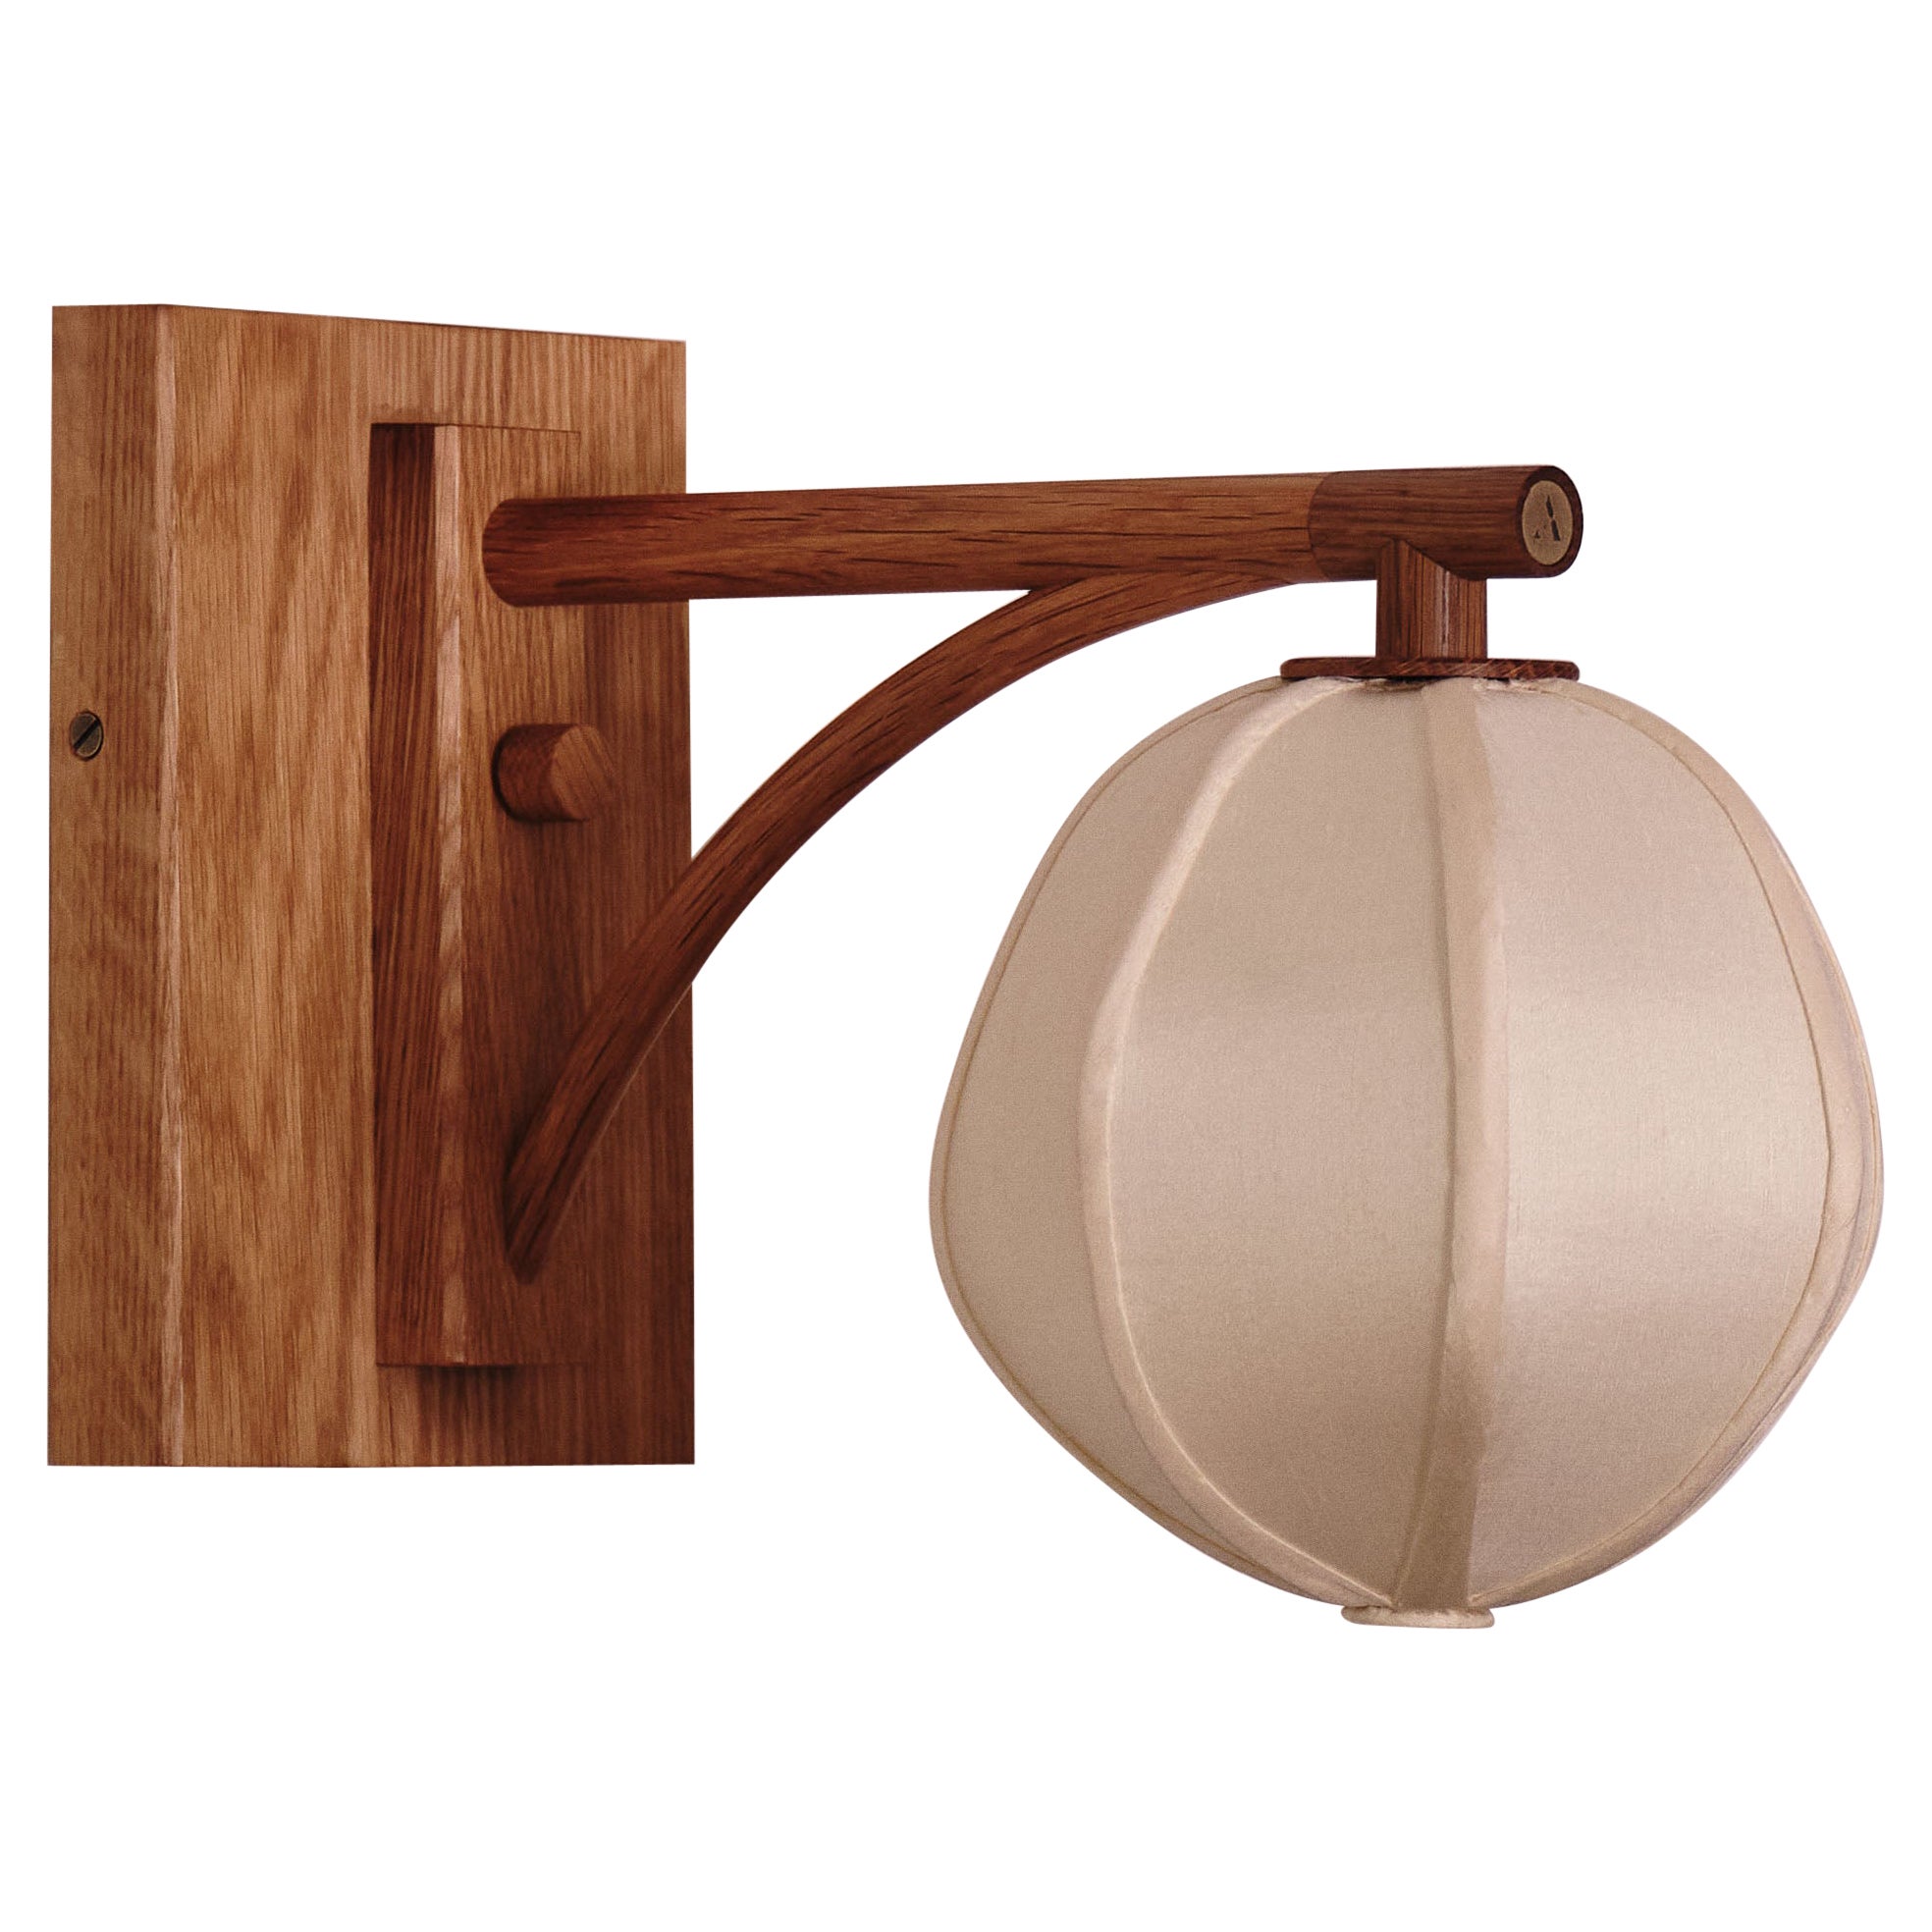 Anna Karlin Mulberry Globe Sconce - Small For Sale